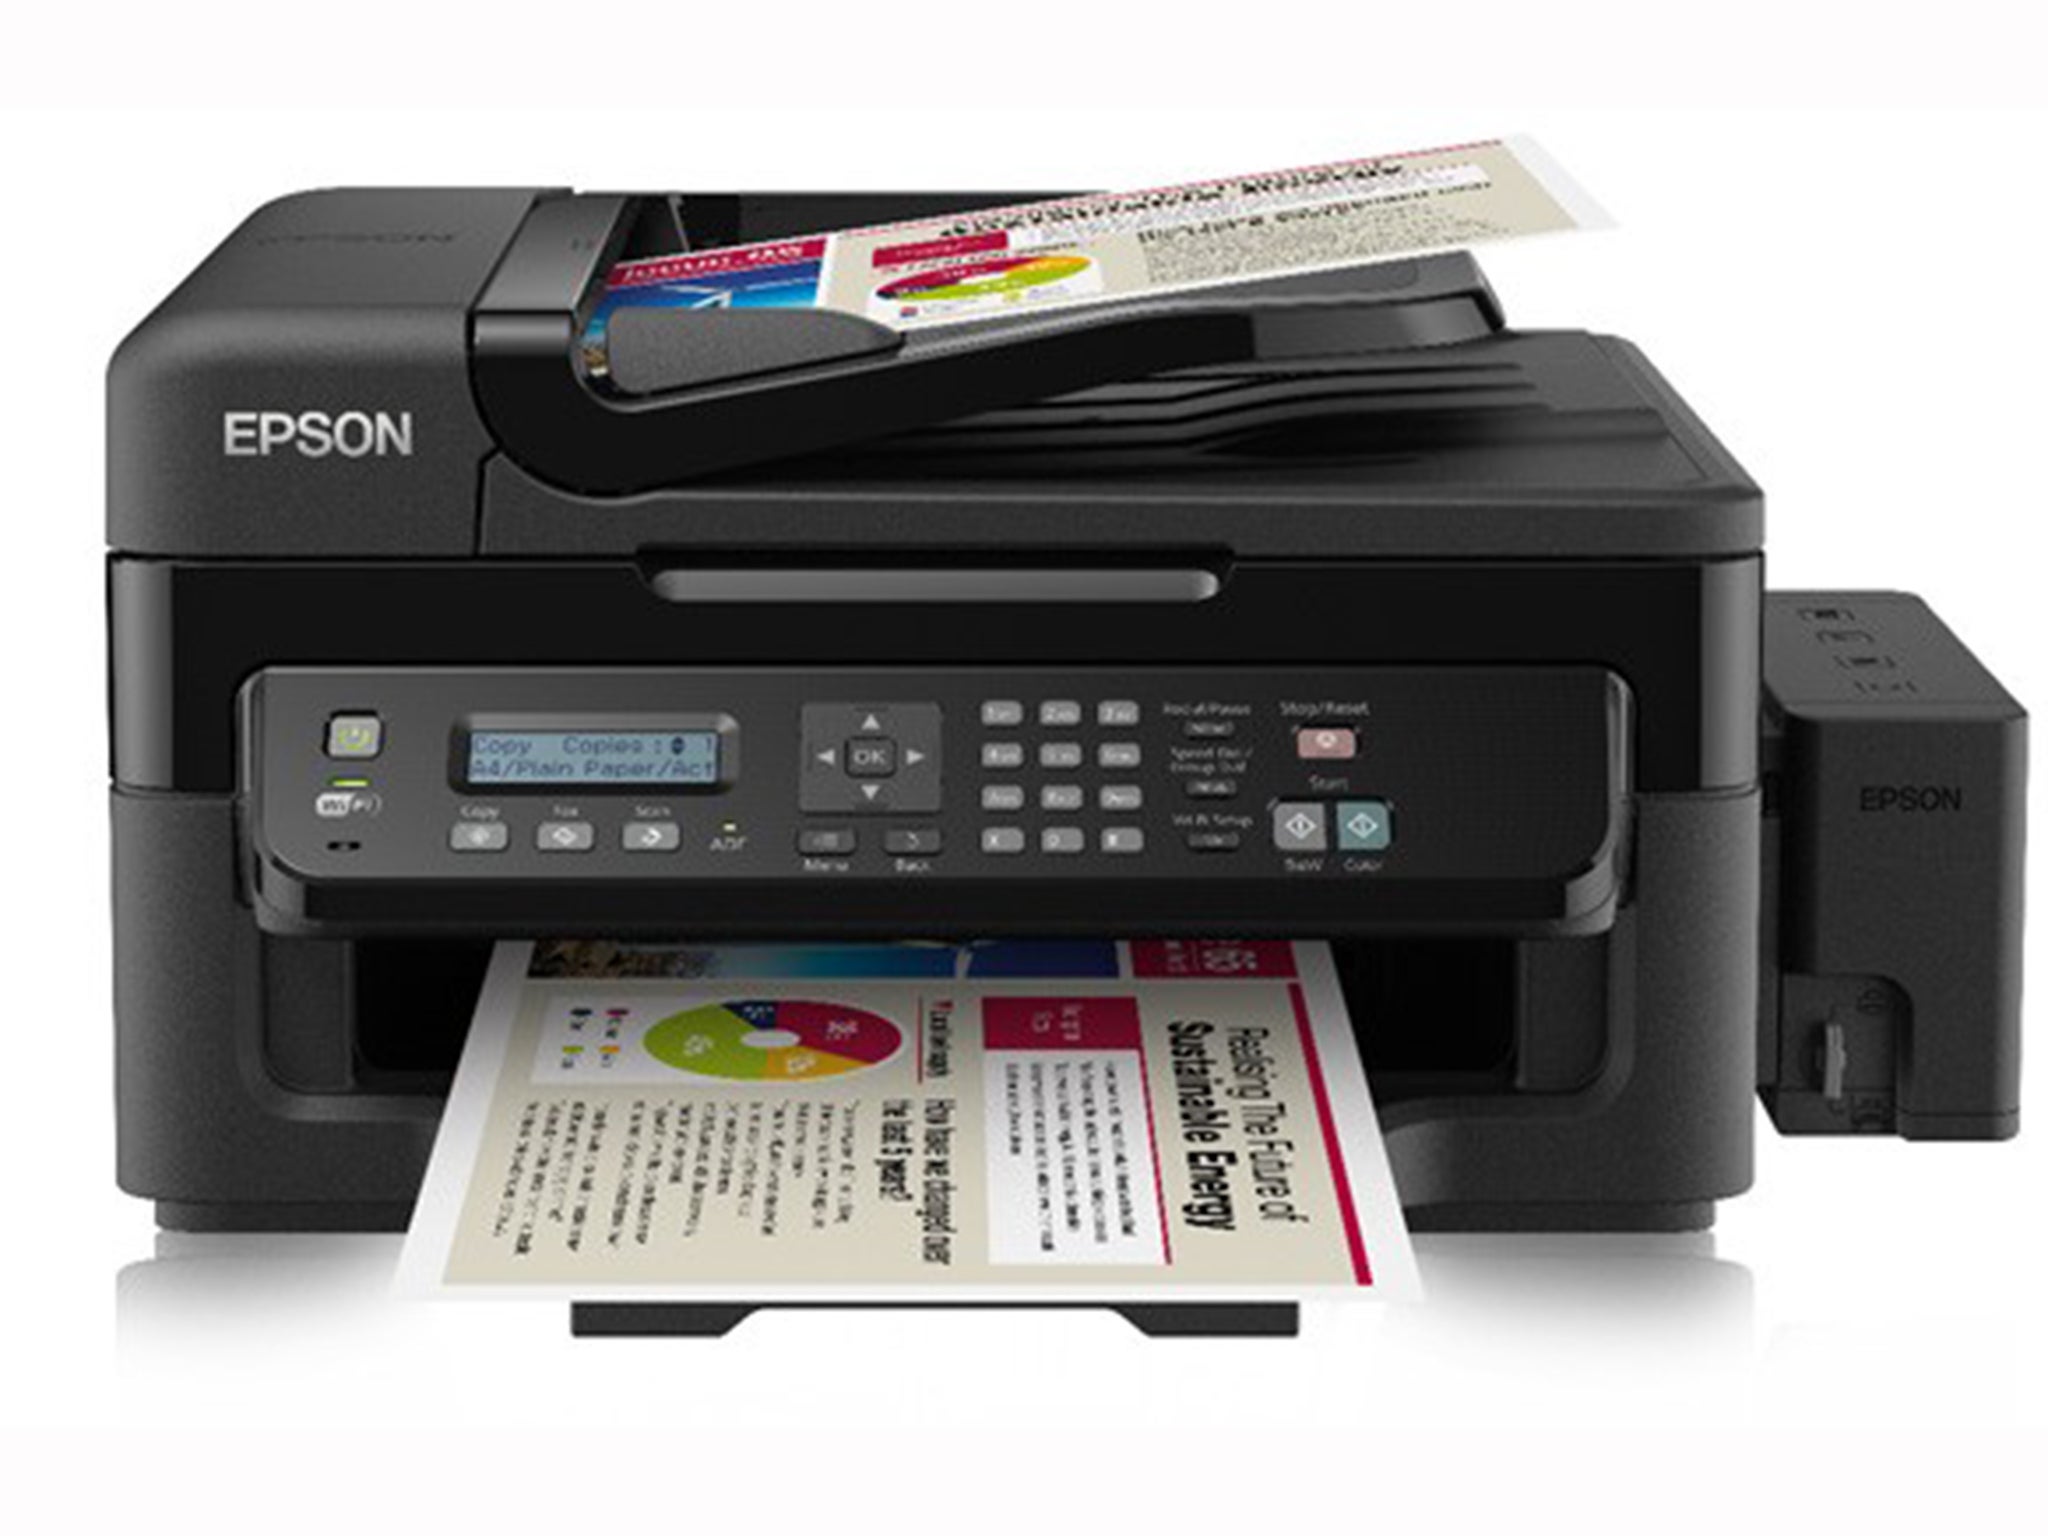 Revolution: Epson is trying a new approach